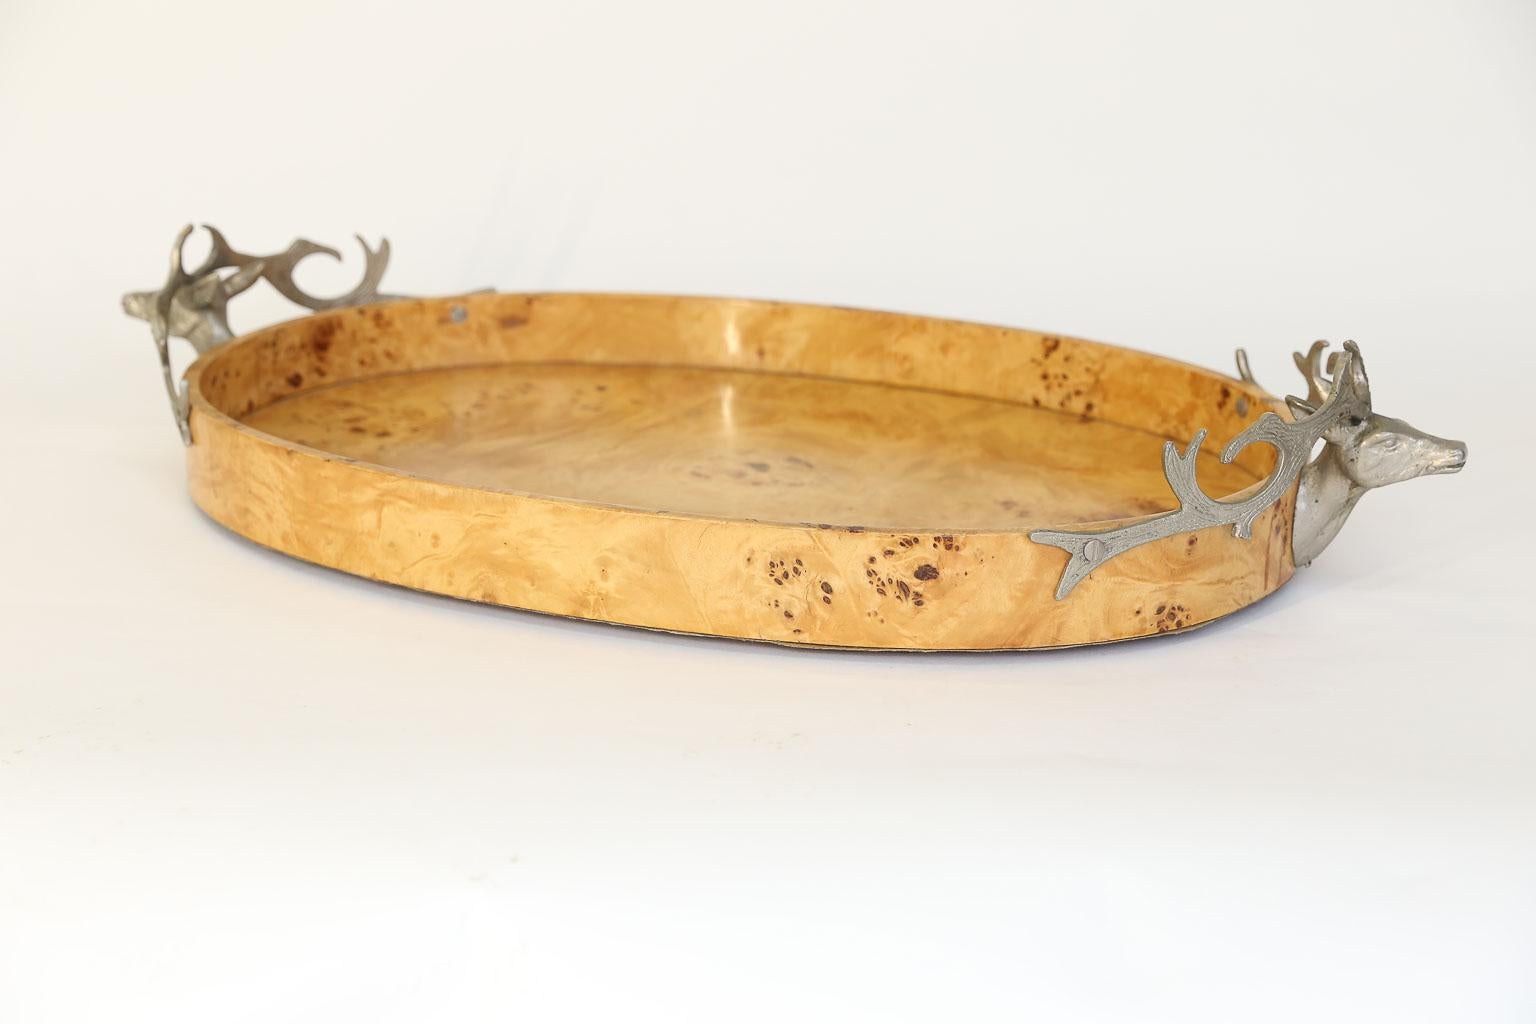 This beautiful burl wood tray is embellished with worn brass stag heads as handles. The sides of the tray are 2.5 inches high; dimensions below are for the tray at the largest points. This lovely, large tray could serve as a desk accessory or in a